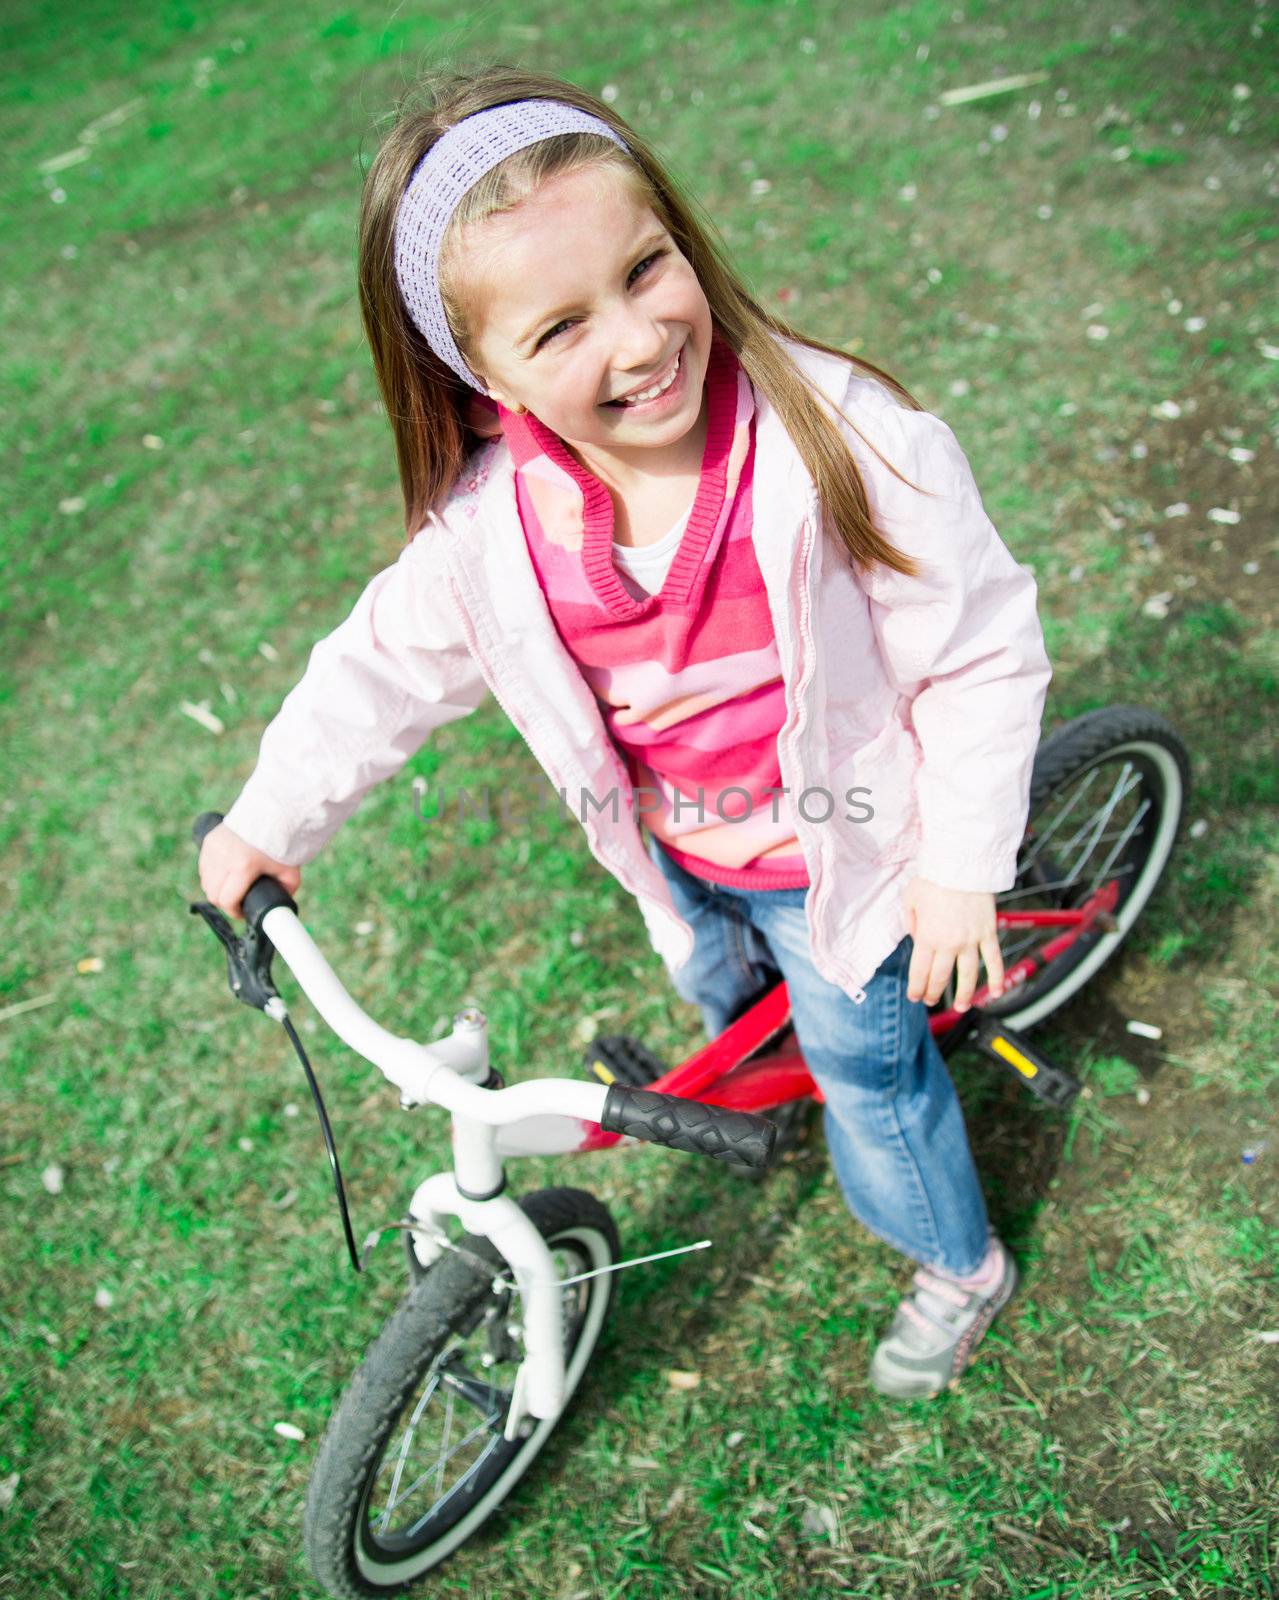 Cute smiling little girl with bicycle in summer park outdoors